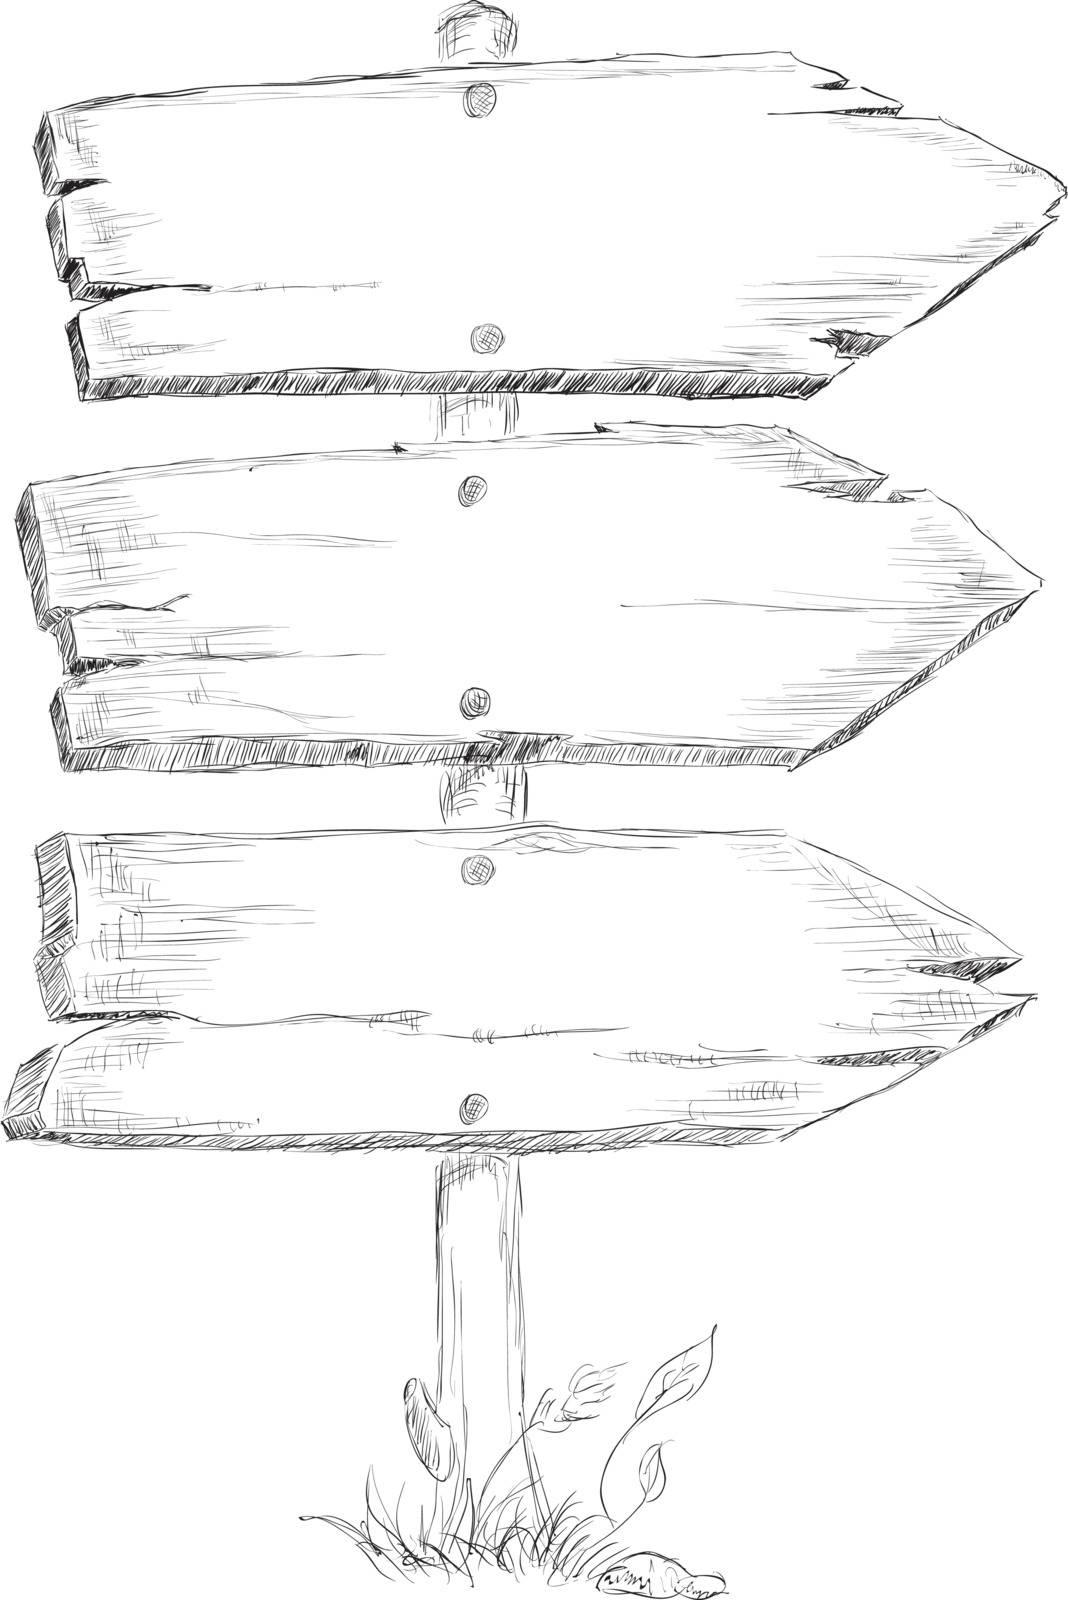 Wooden signpost of the old boards. Vector illustration.